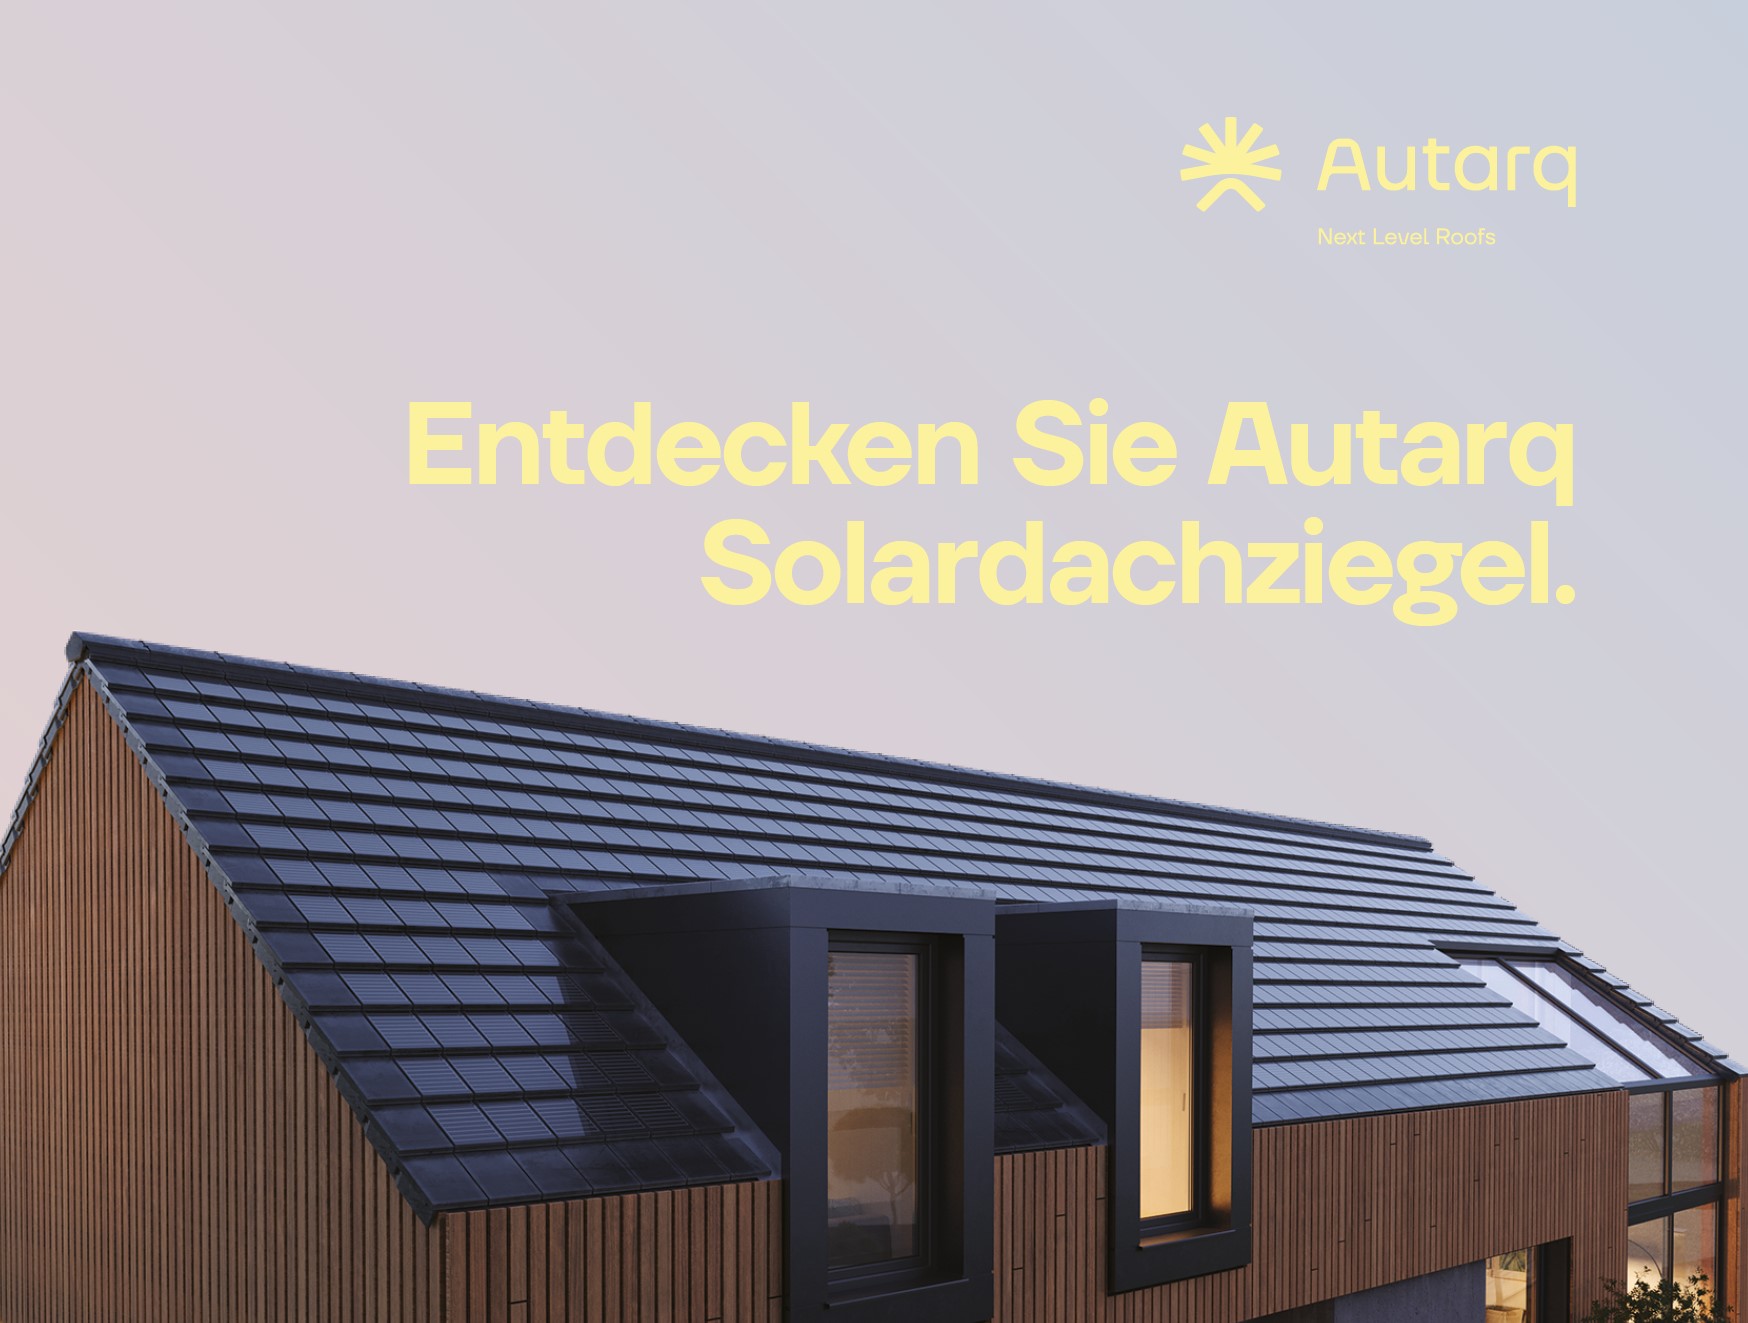 autarq - Building Integrated PV Roof Tiles